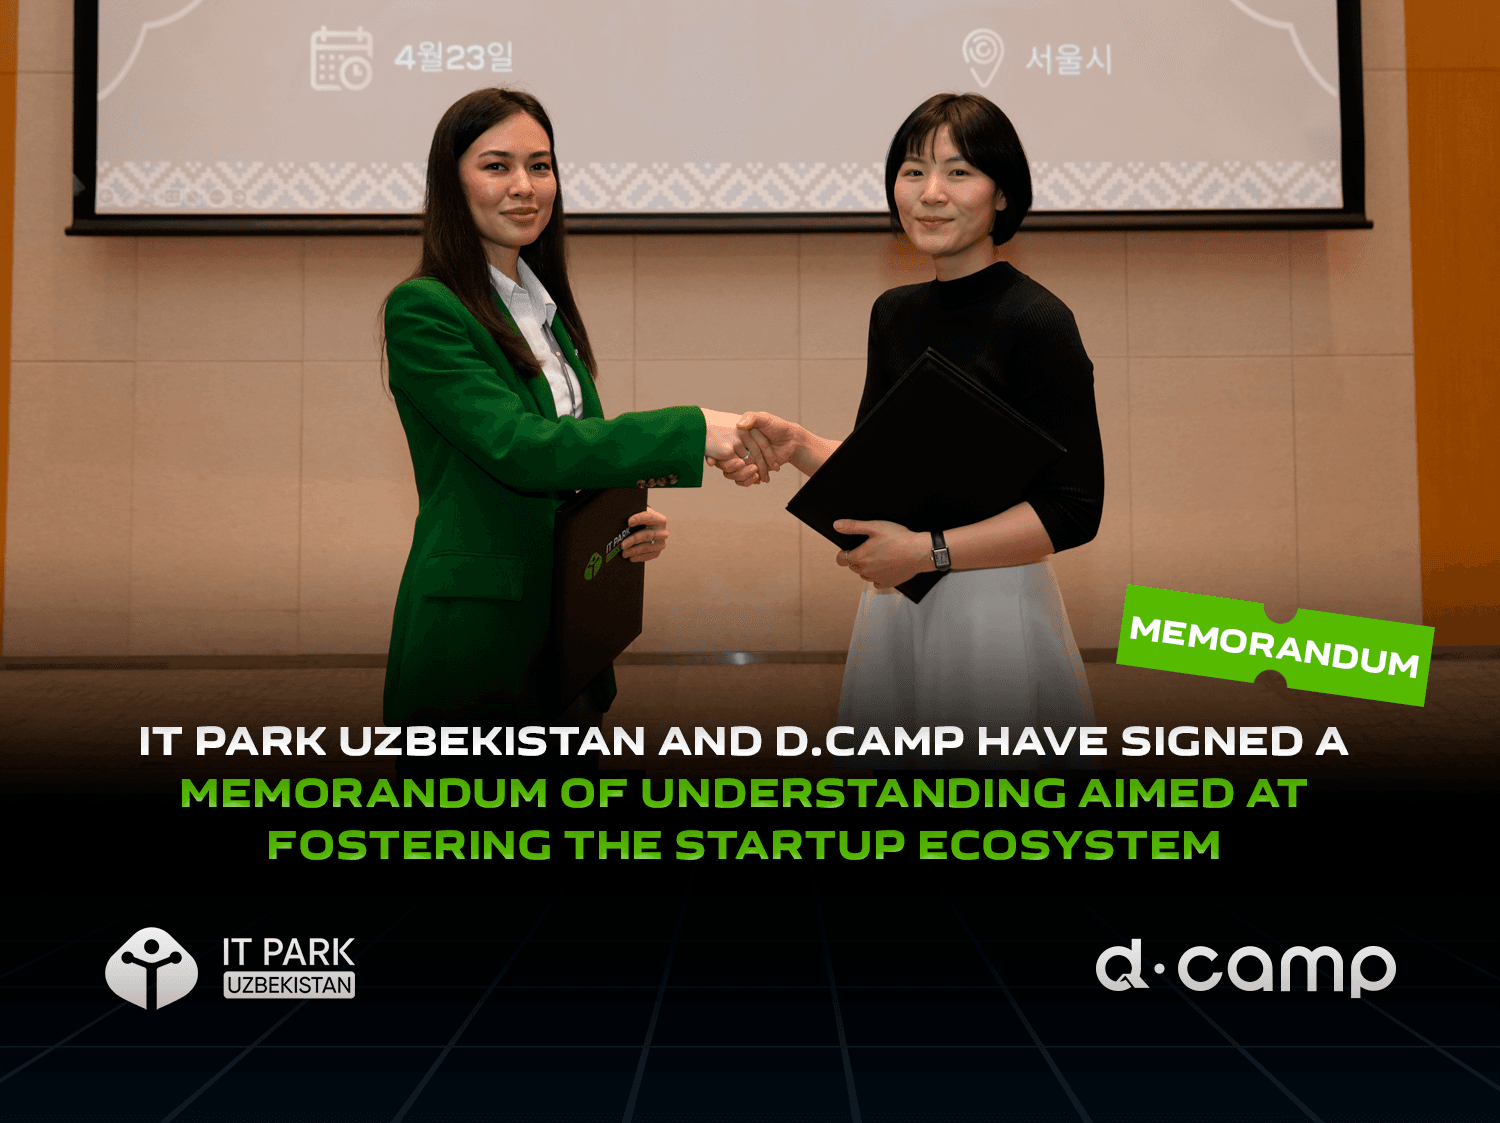 IT Park Uzbekistan and D.Camp have signed a Memorandum of Understanding aimed at fostering the startup ecosystem